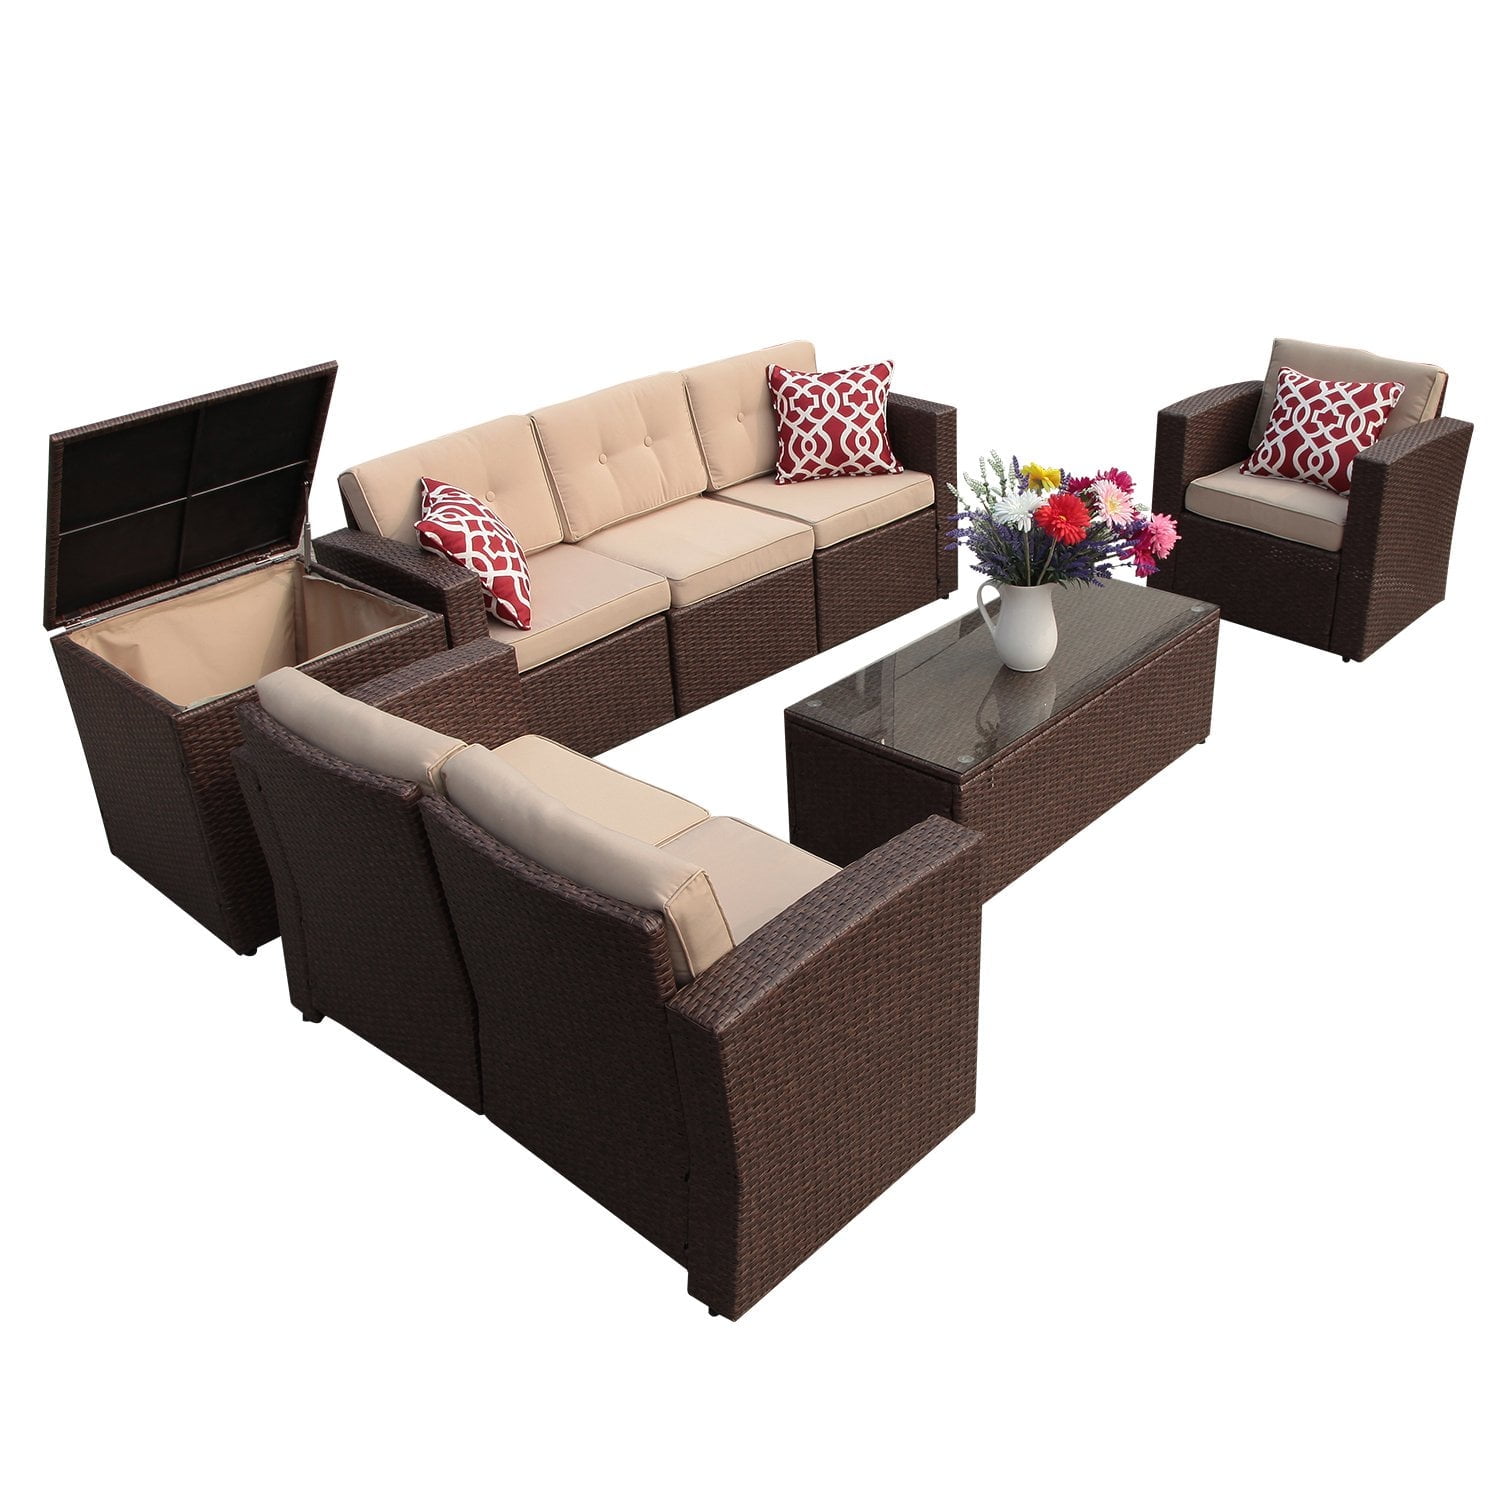 JOIVI 8 Pc Outdoor Furniture Set with Storage Box, Wicker Rattan Patio Conversation Set with Sectional Sofa Couch for 6 People, Espresso Brown - image 1 of 12